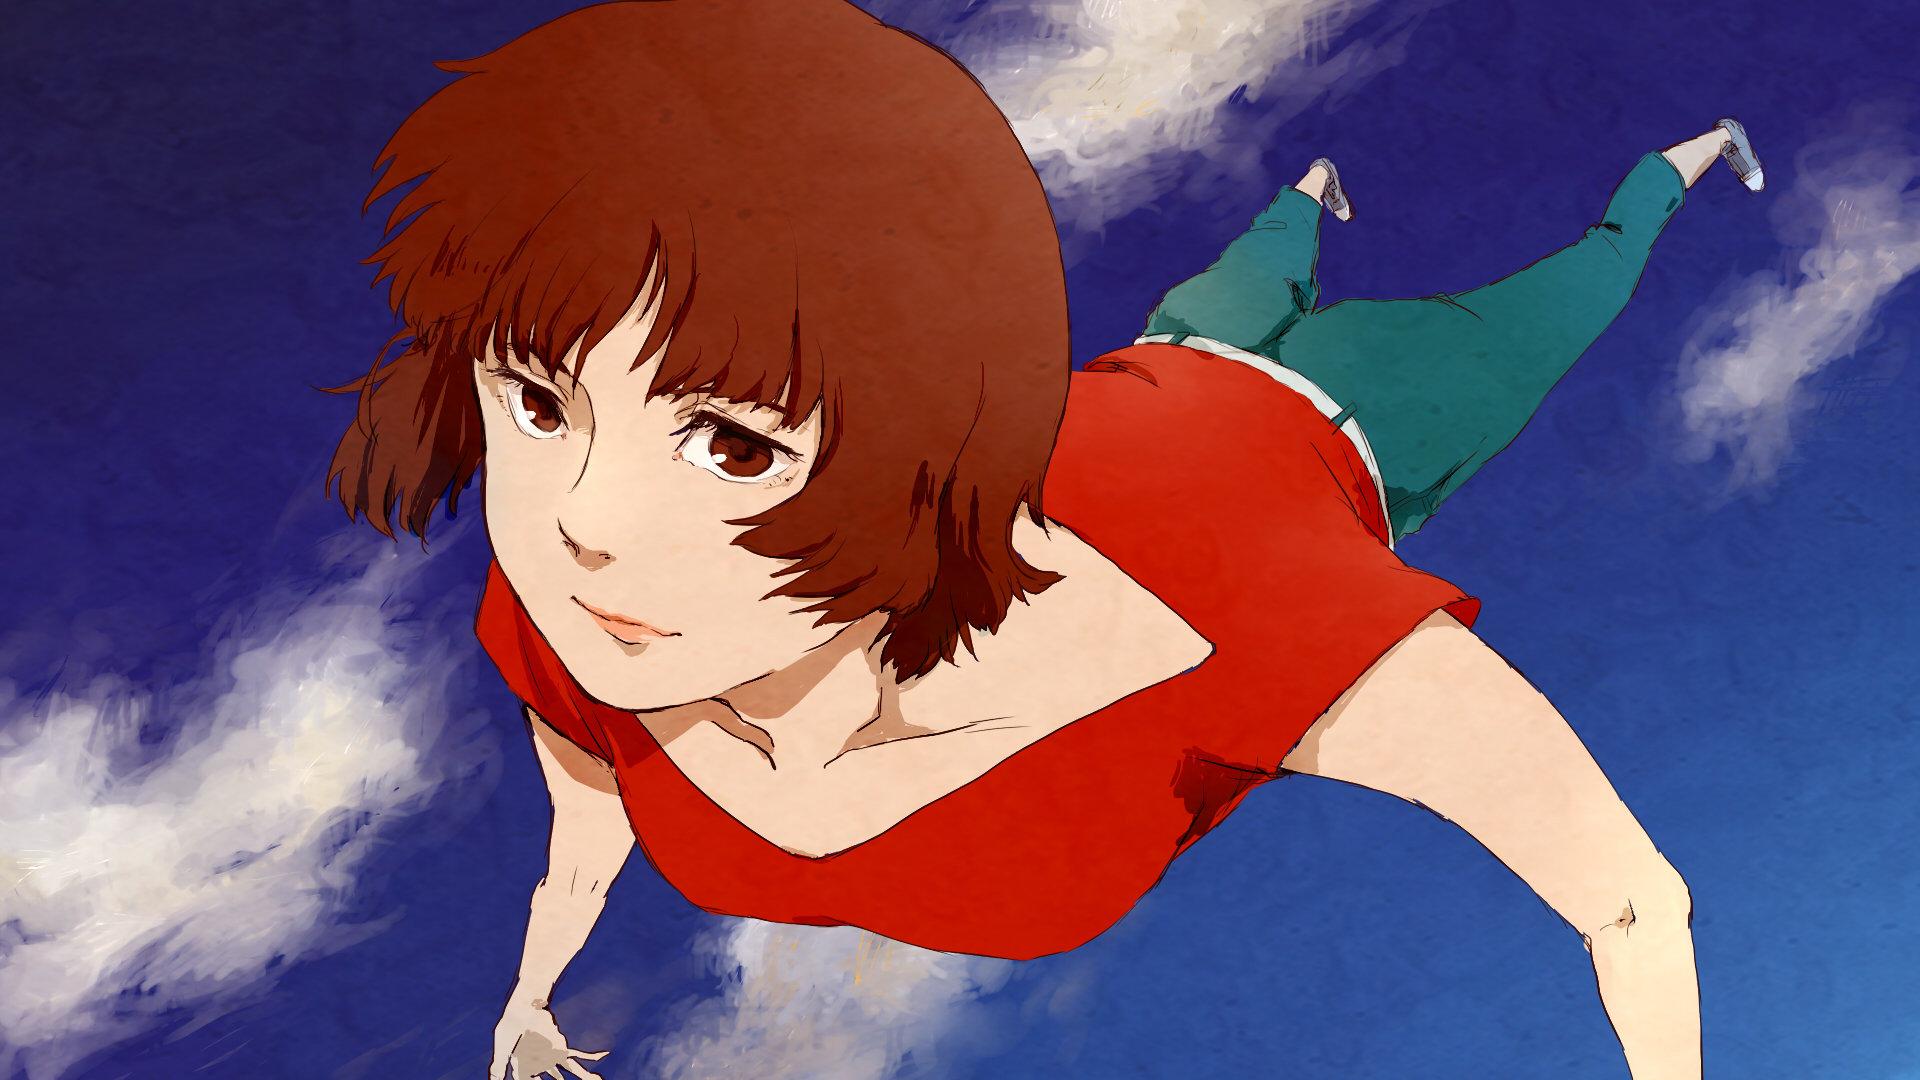 Paprika Anime HD Wallpapers - Wallpaper Cave